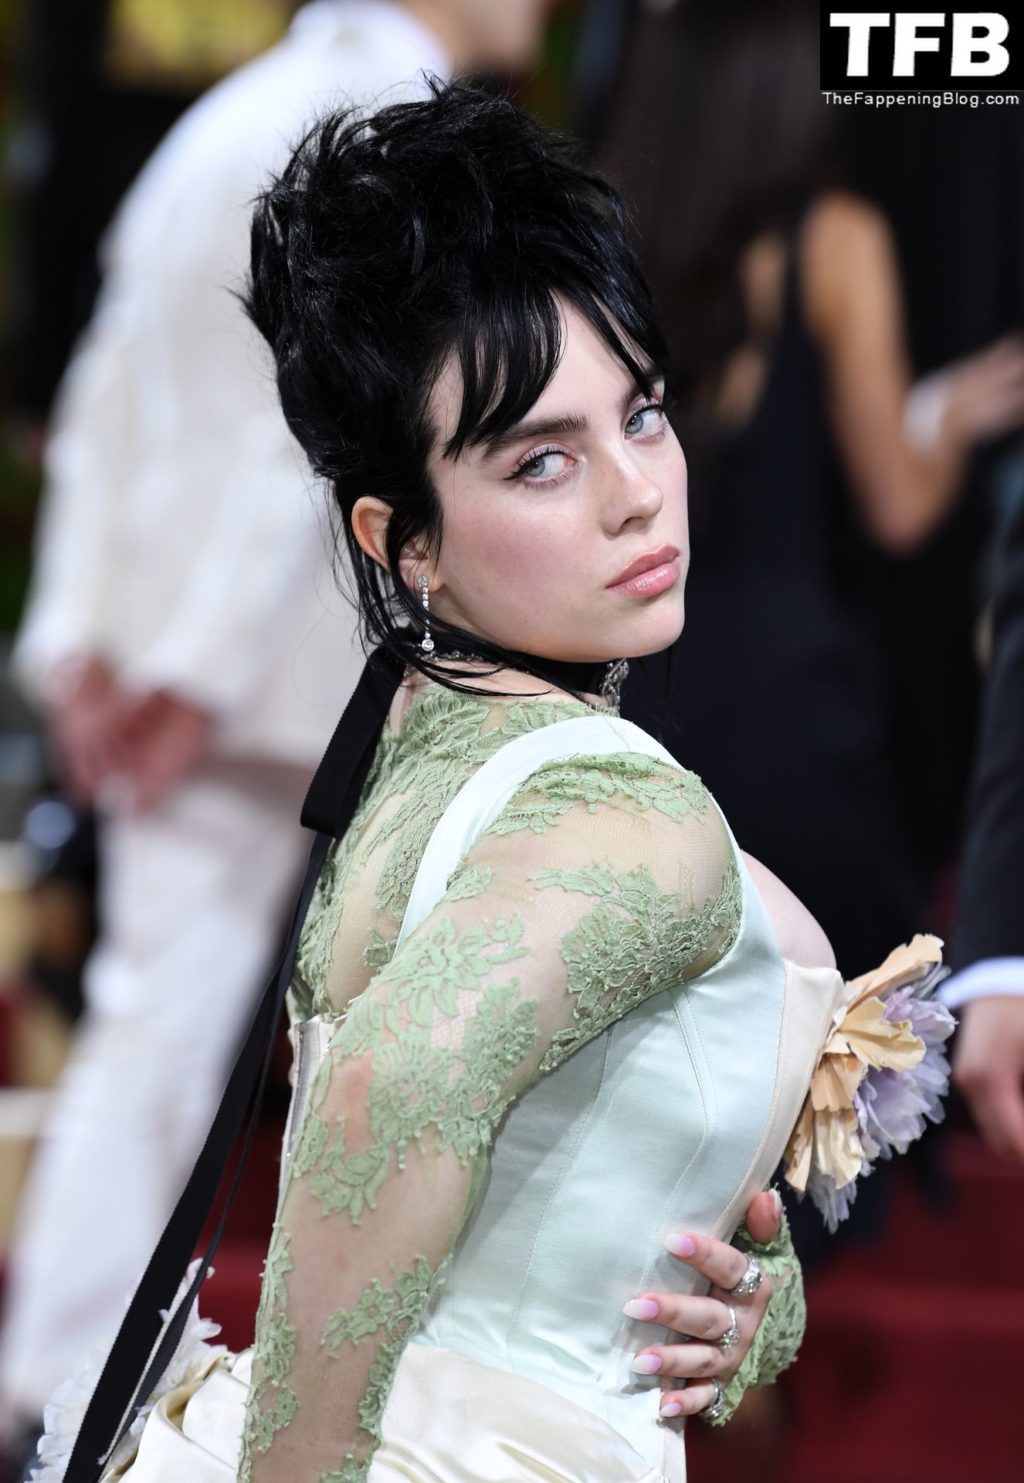 Billie Eilish Sexy The Fappening Blog 108 1024x1483 - Billie Eilish Showcases Nice Cleavage at The 2022 Met Gala in NYC (155 Photos)